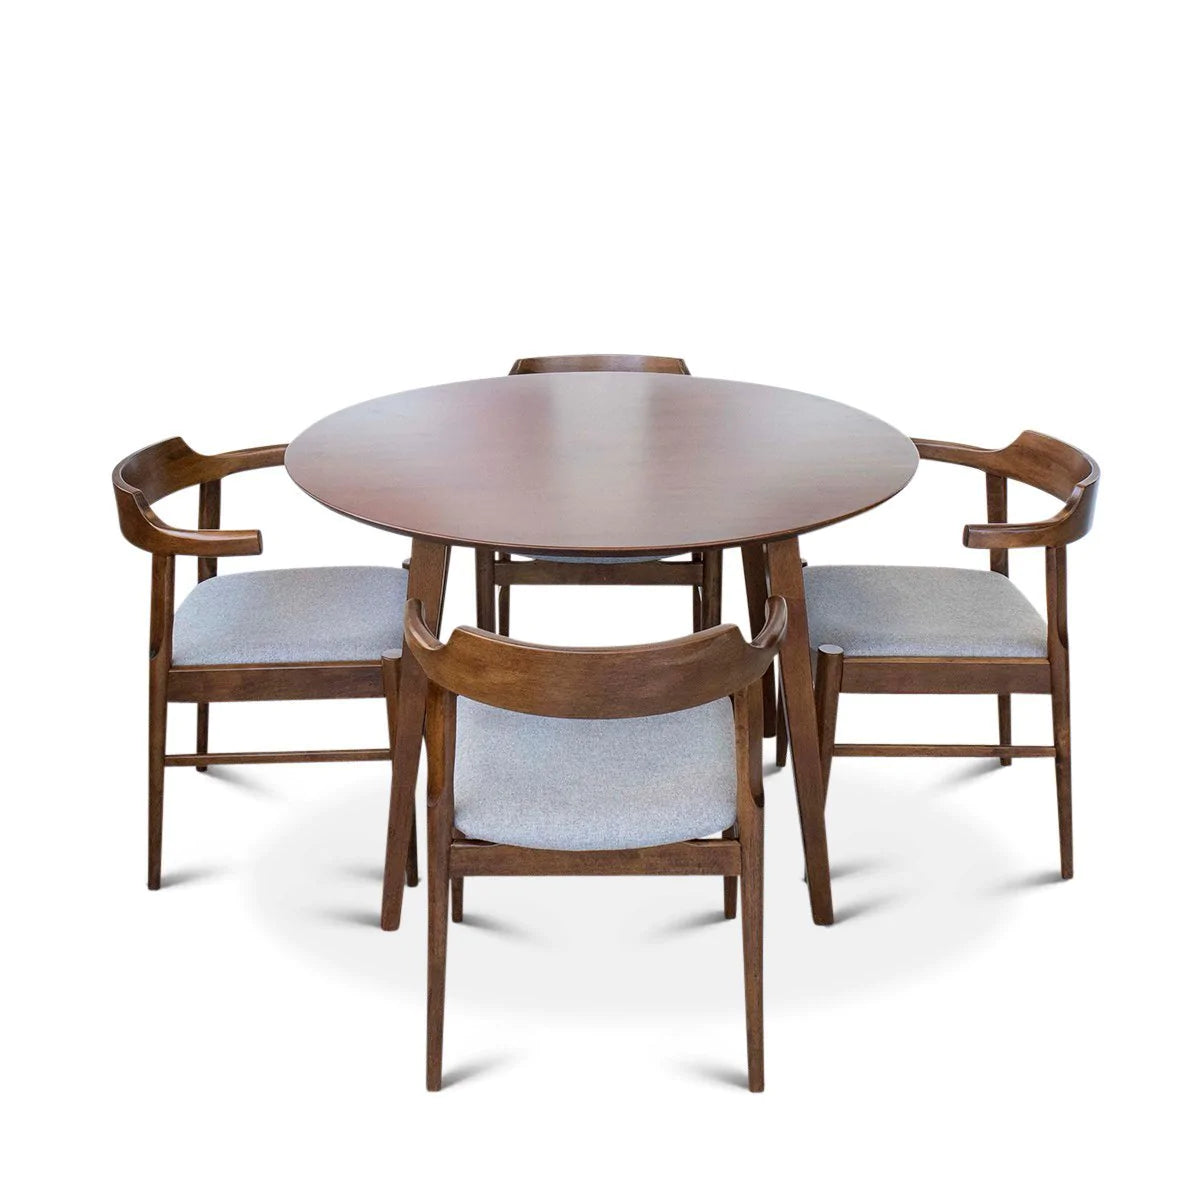 Round Dining Set with 4 Sterling Gray Dining Chairs (Walnut)